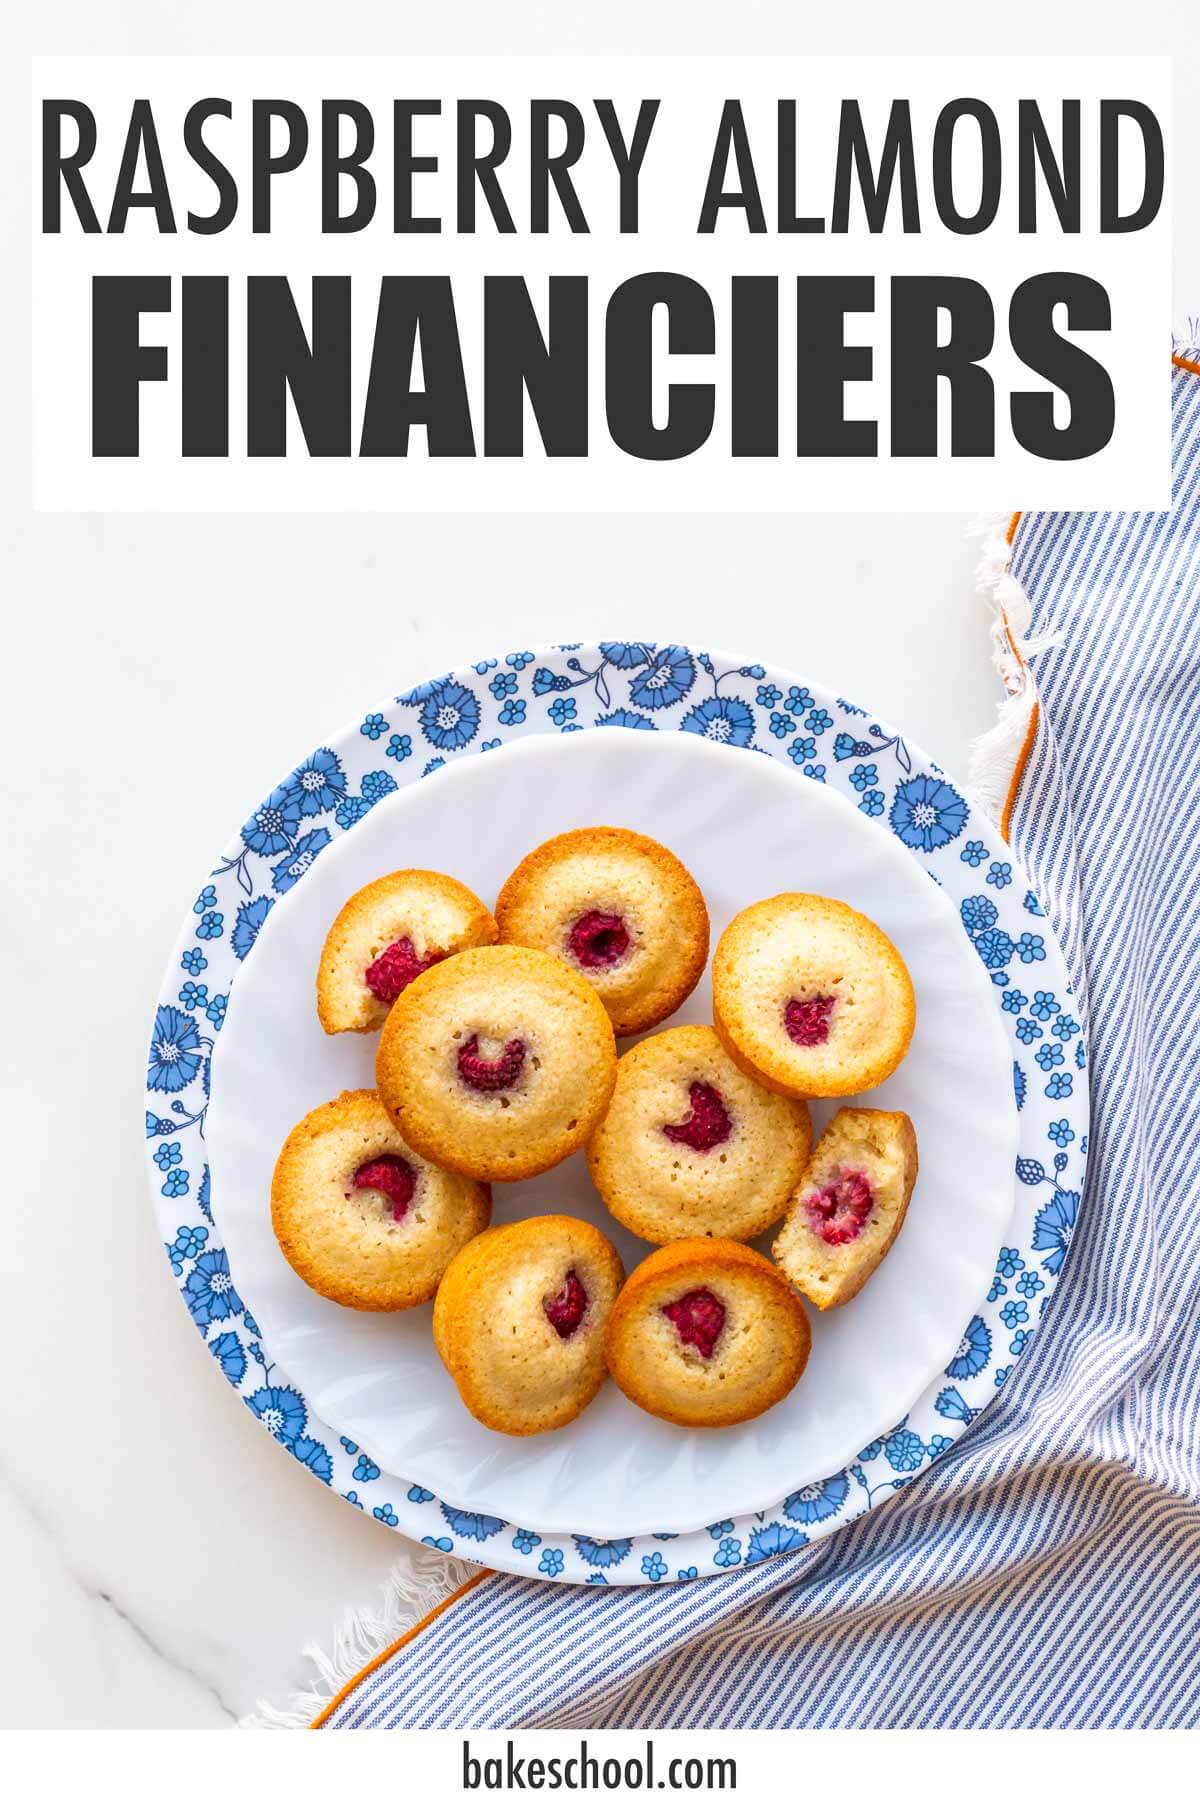 A floral plate of raspberry almond financiers with a striped napkin.